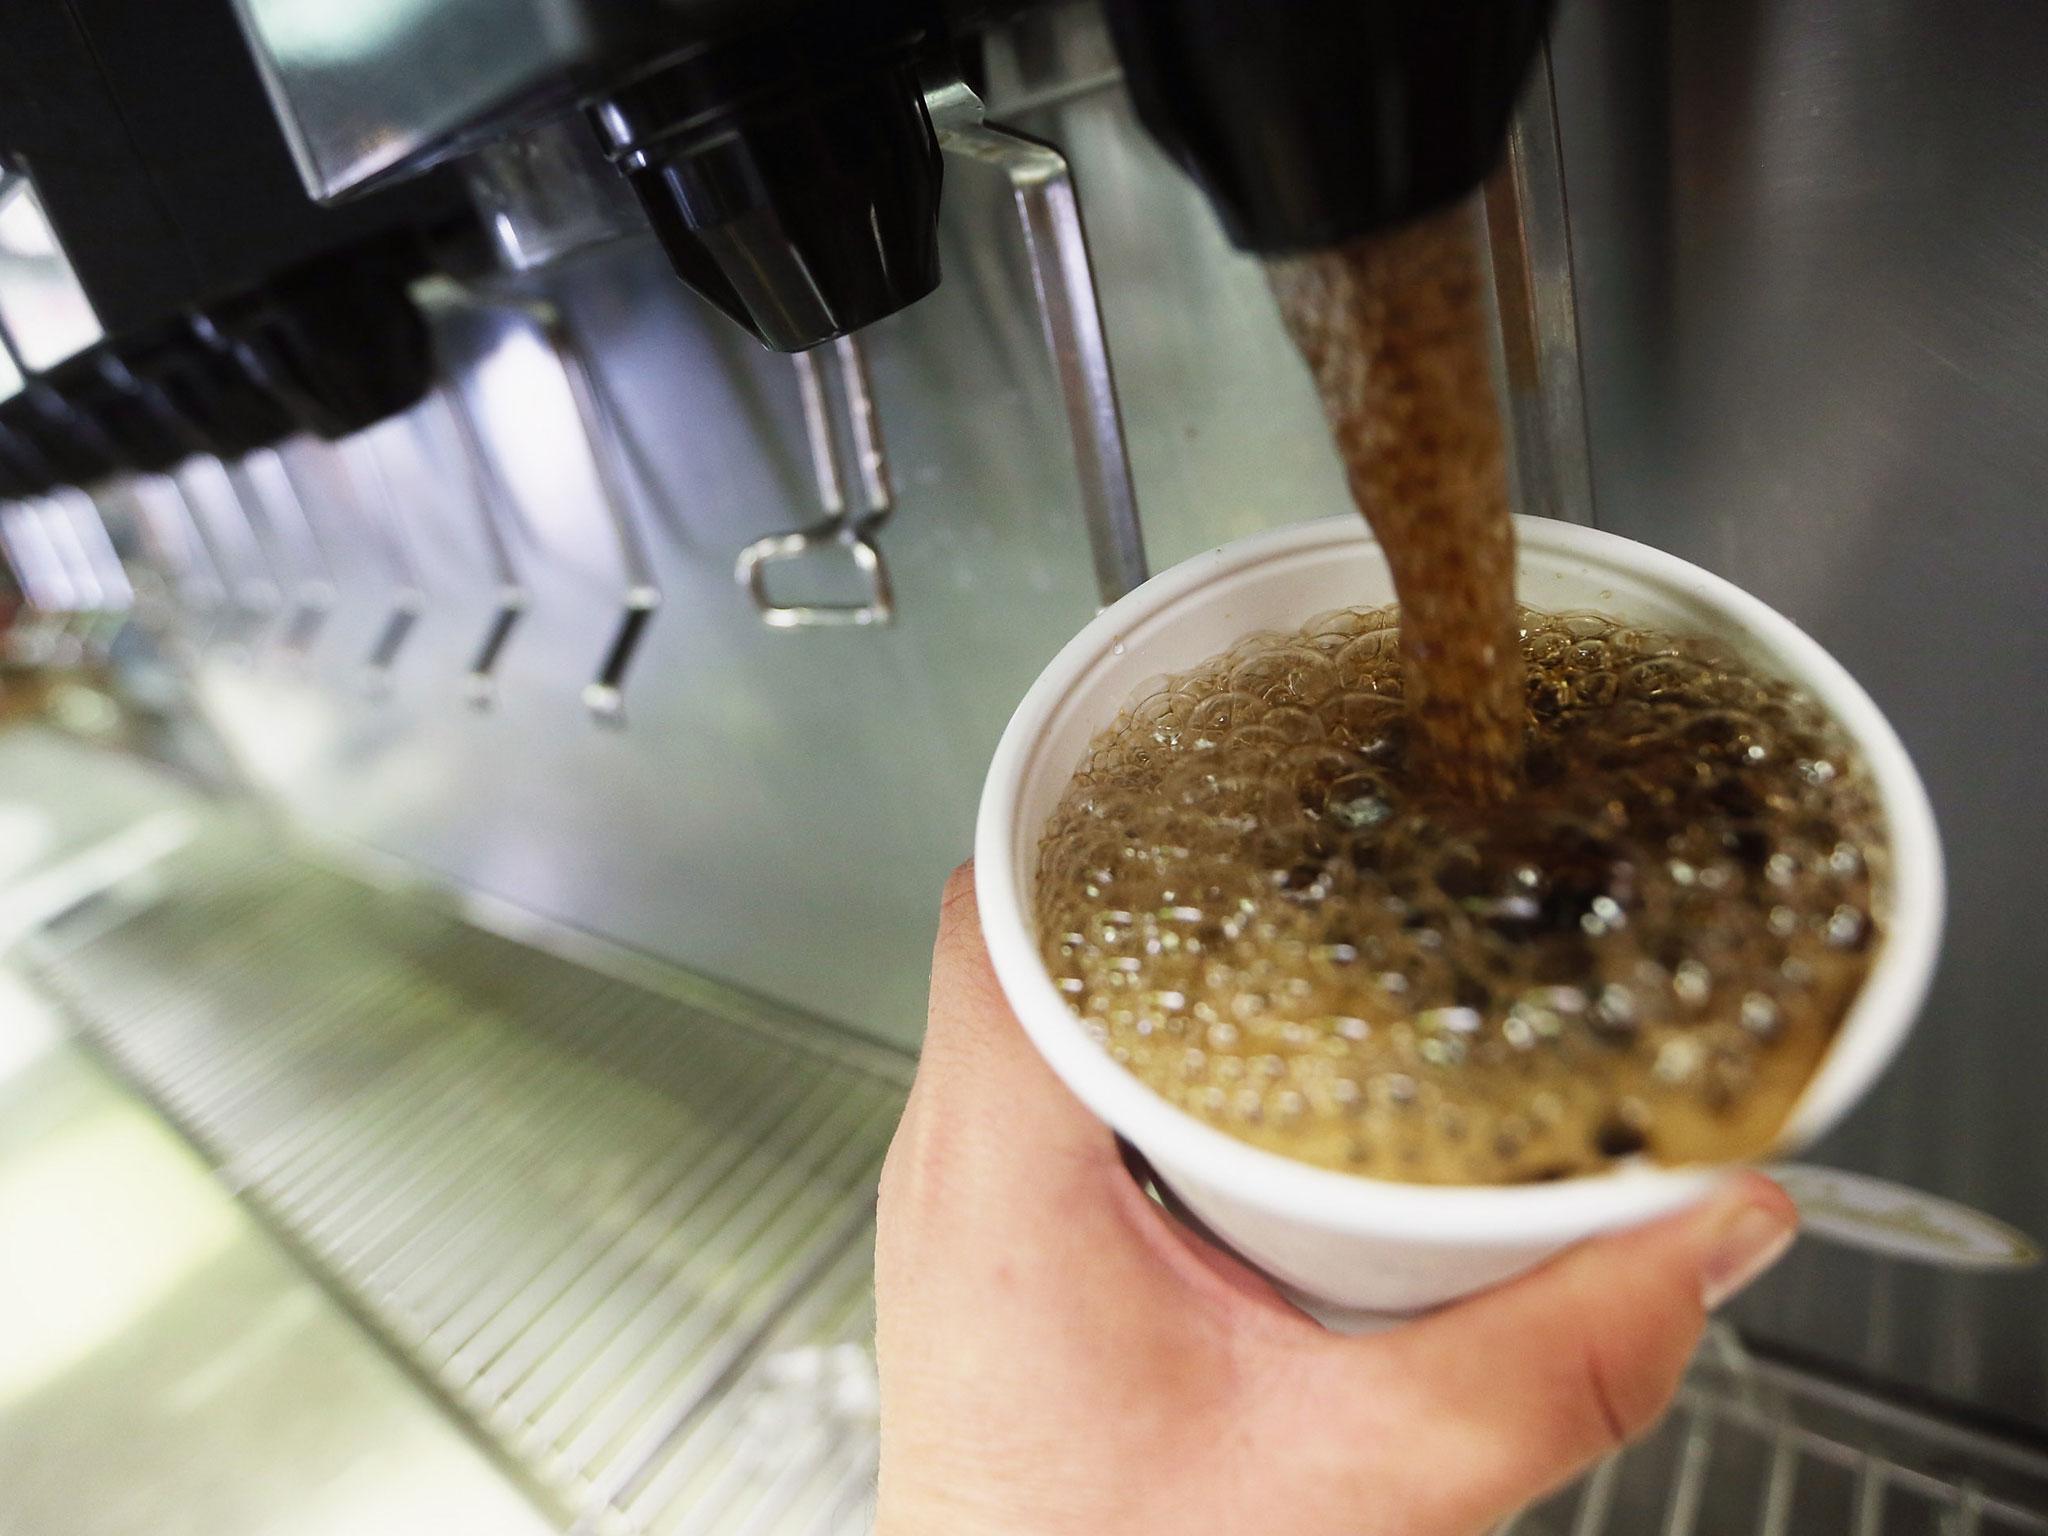 Soft drinks often contain a high level of sugar